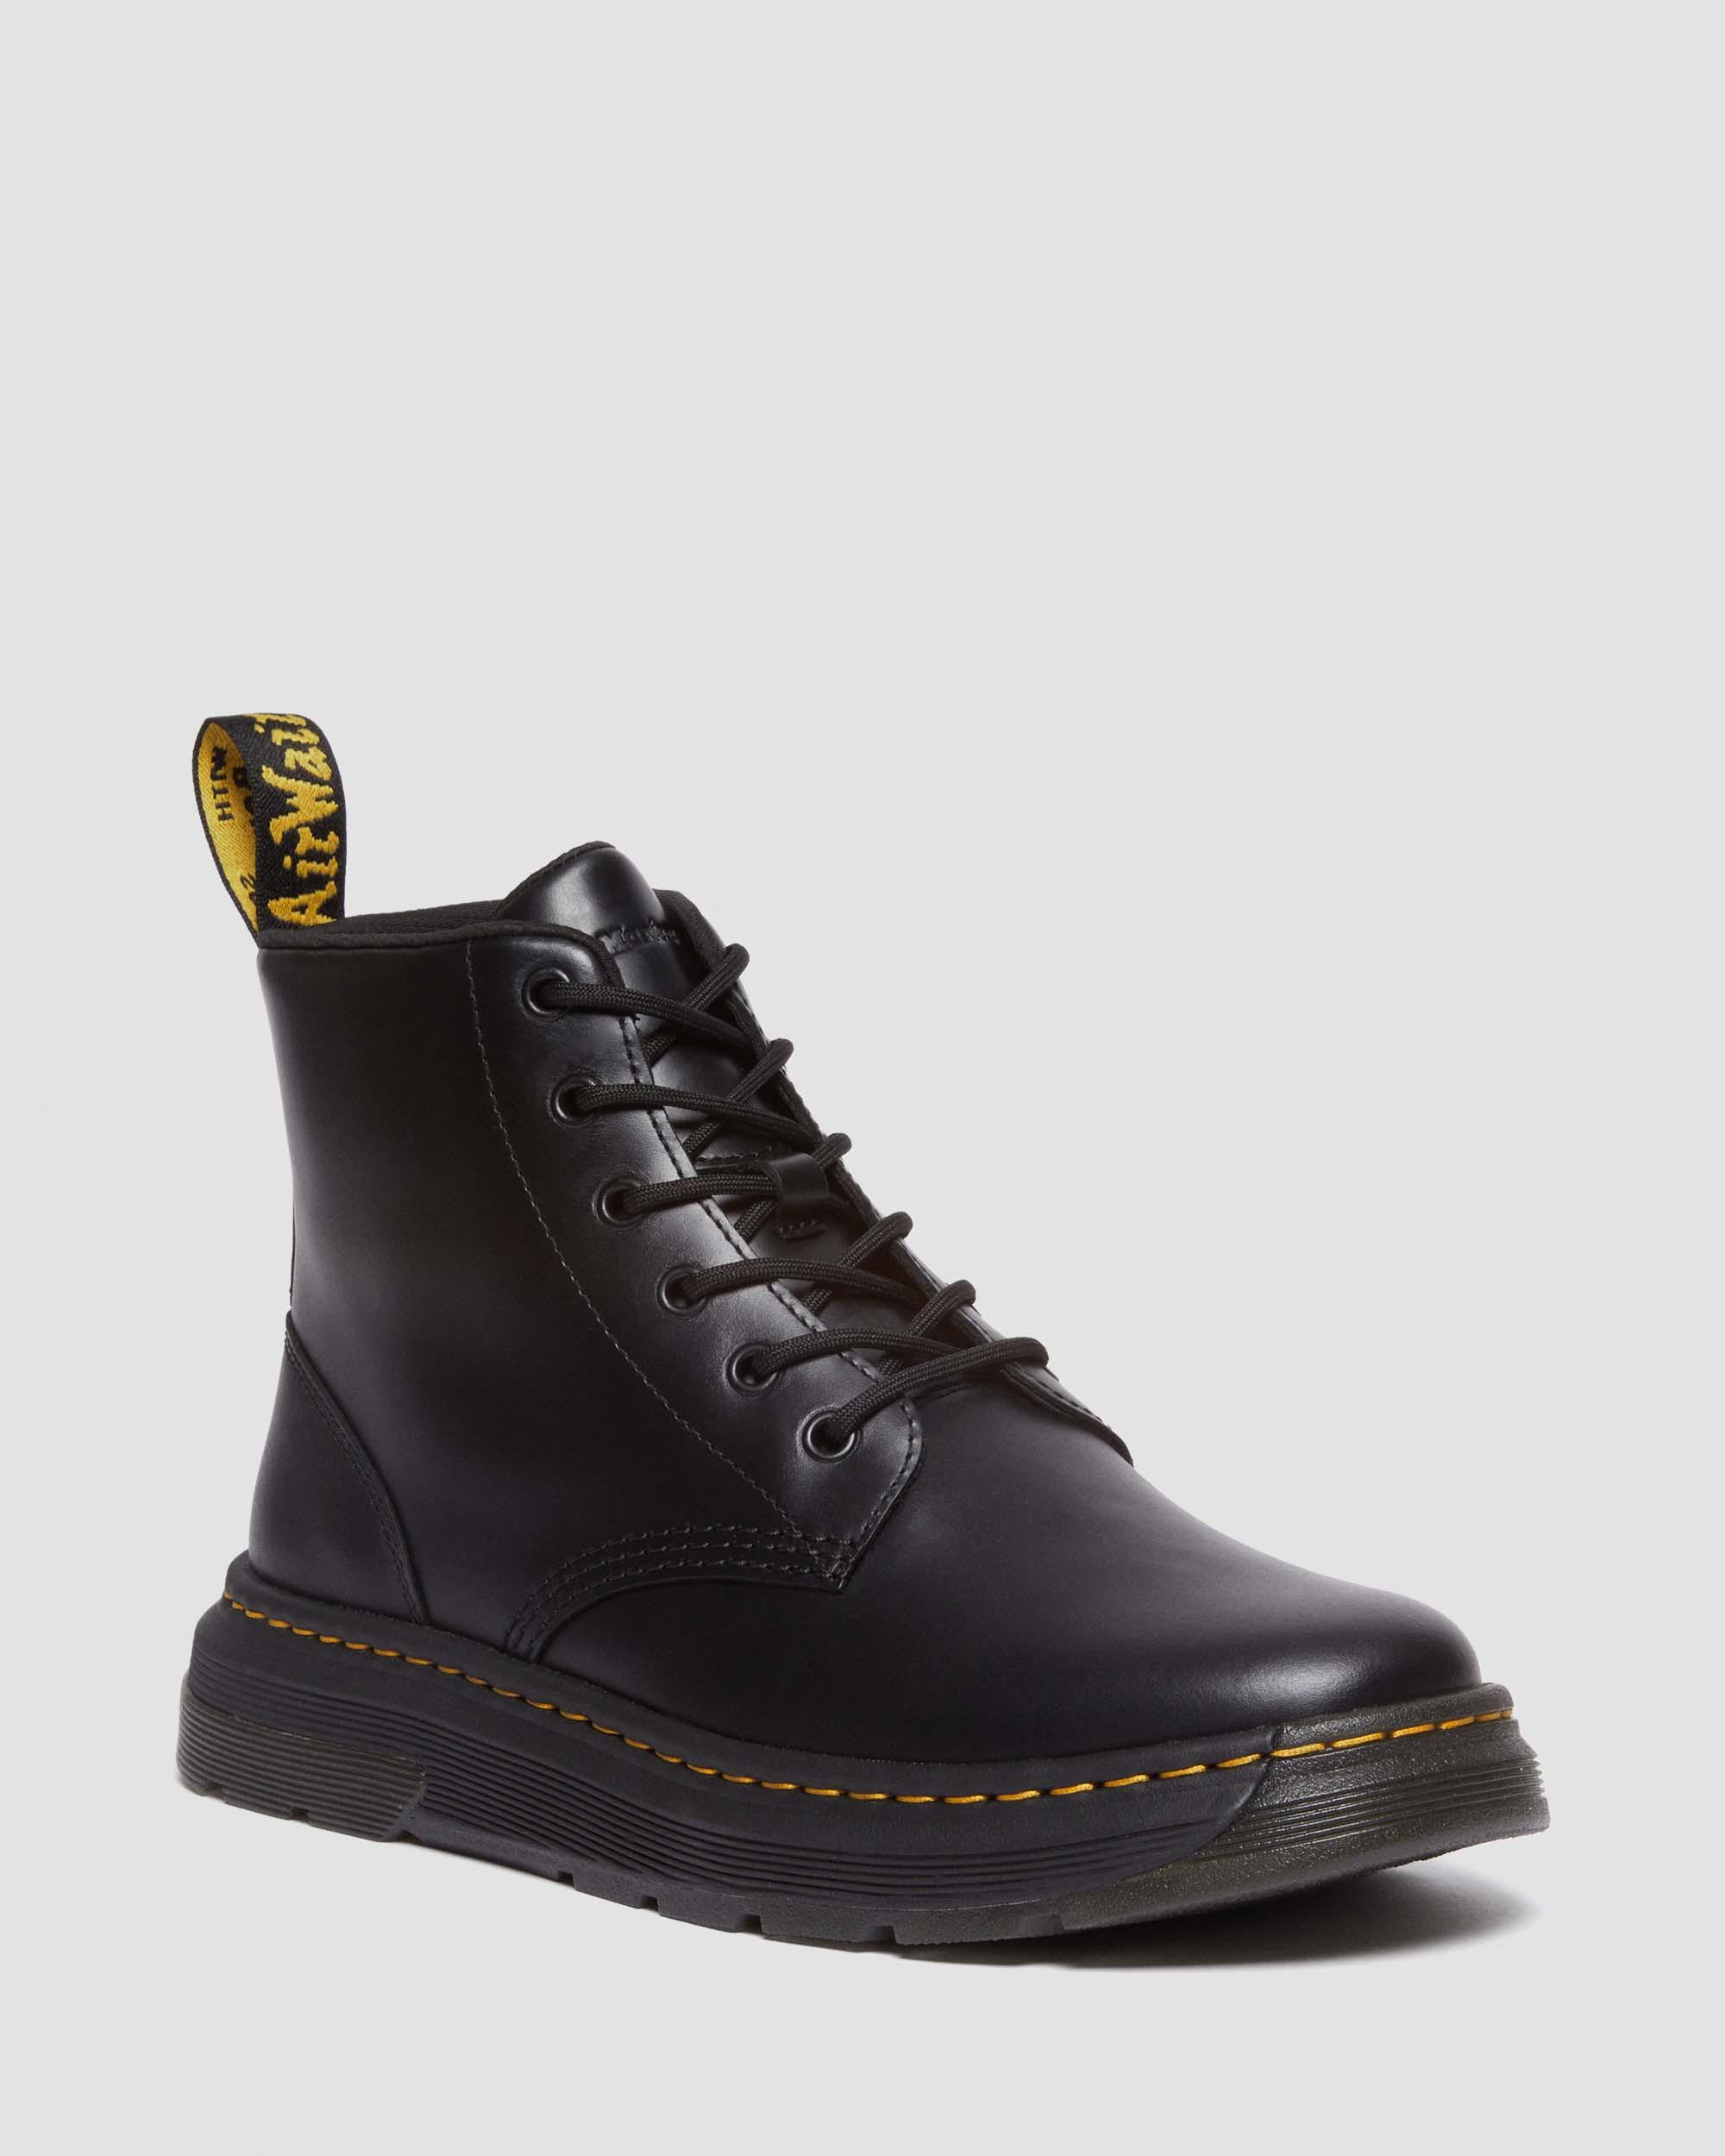 Crewson Chukka Lace Up Leather Boots in BLACK